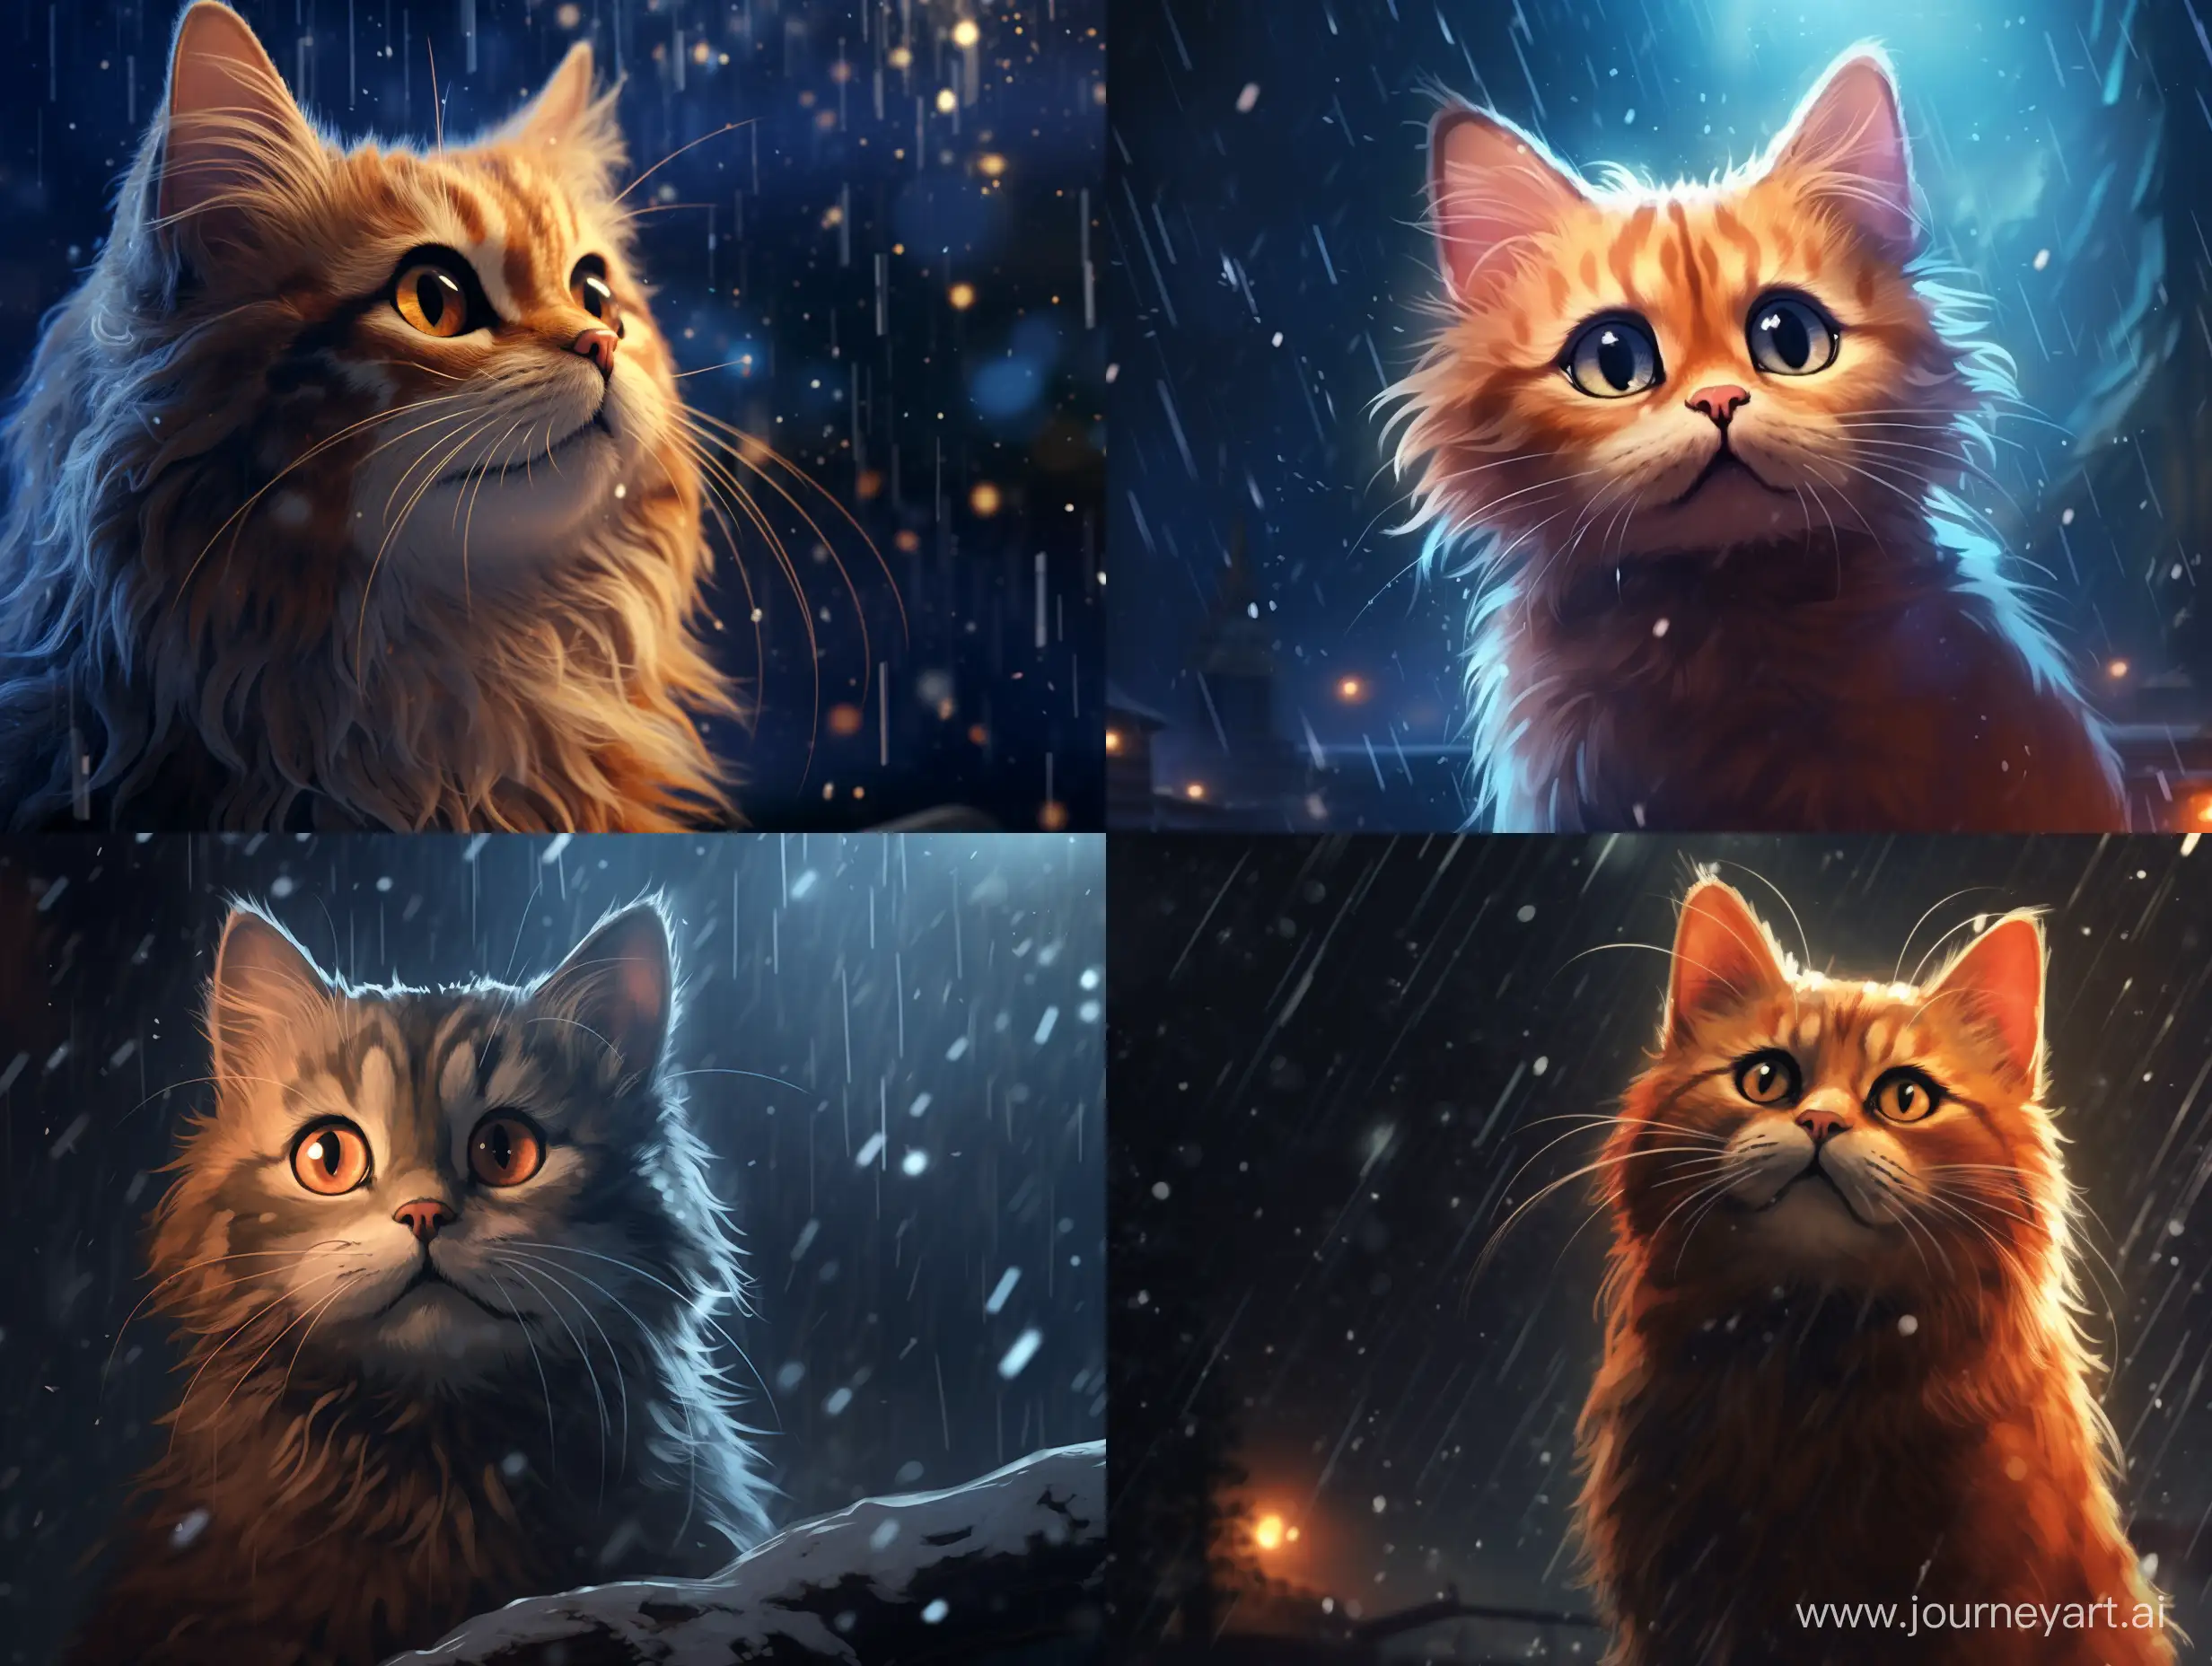 A cat with big fiery eyes catches snowflakes